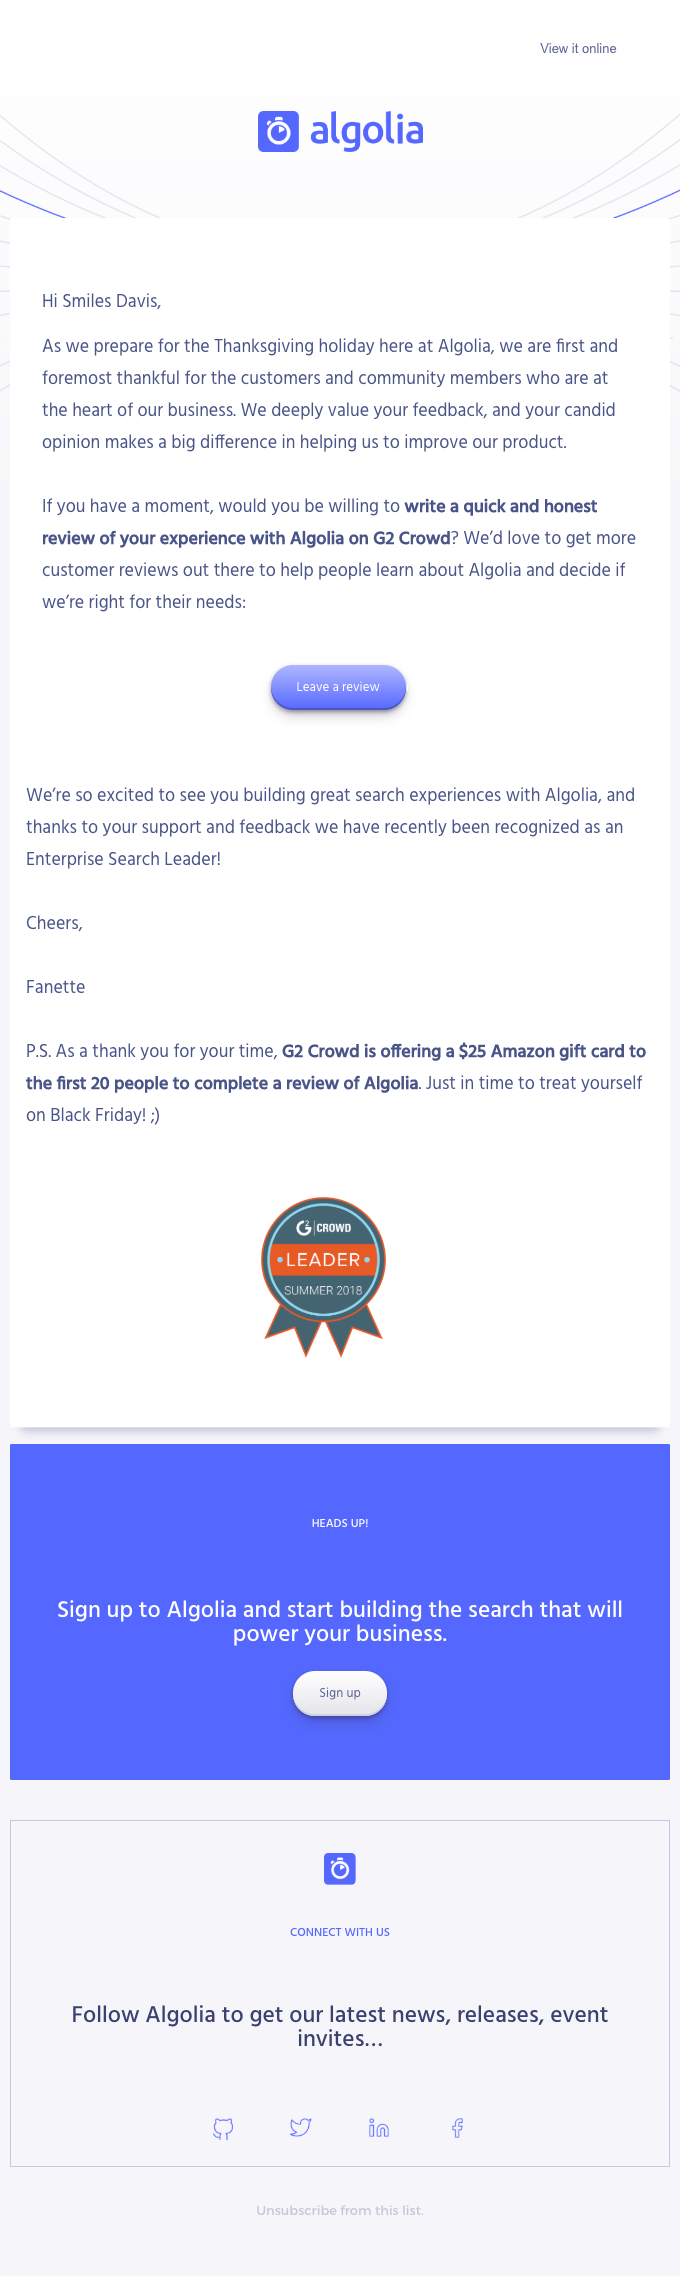 Claim your giftcard in time for Black Friday! Review Algolia